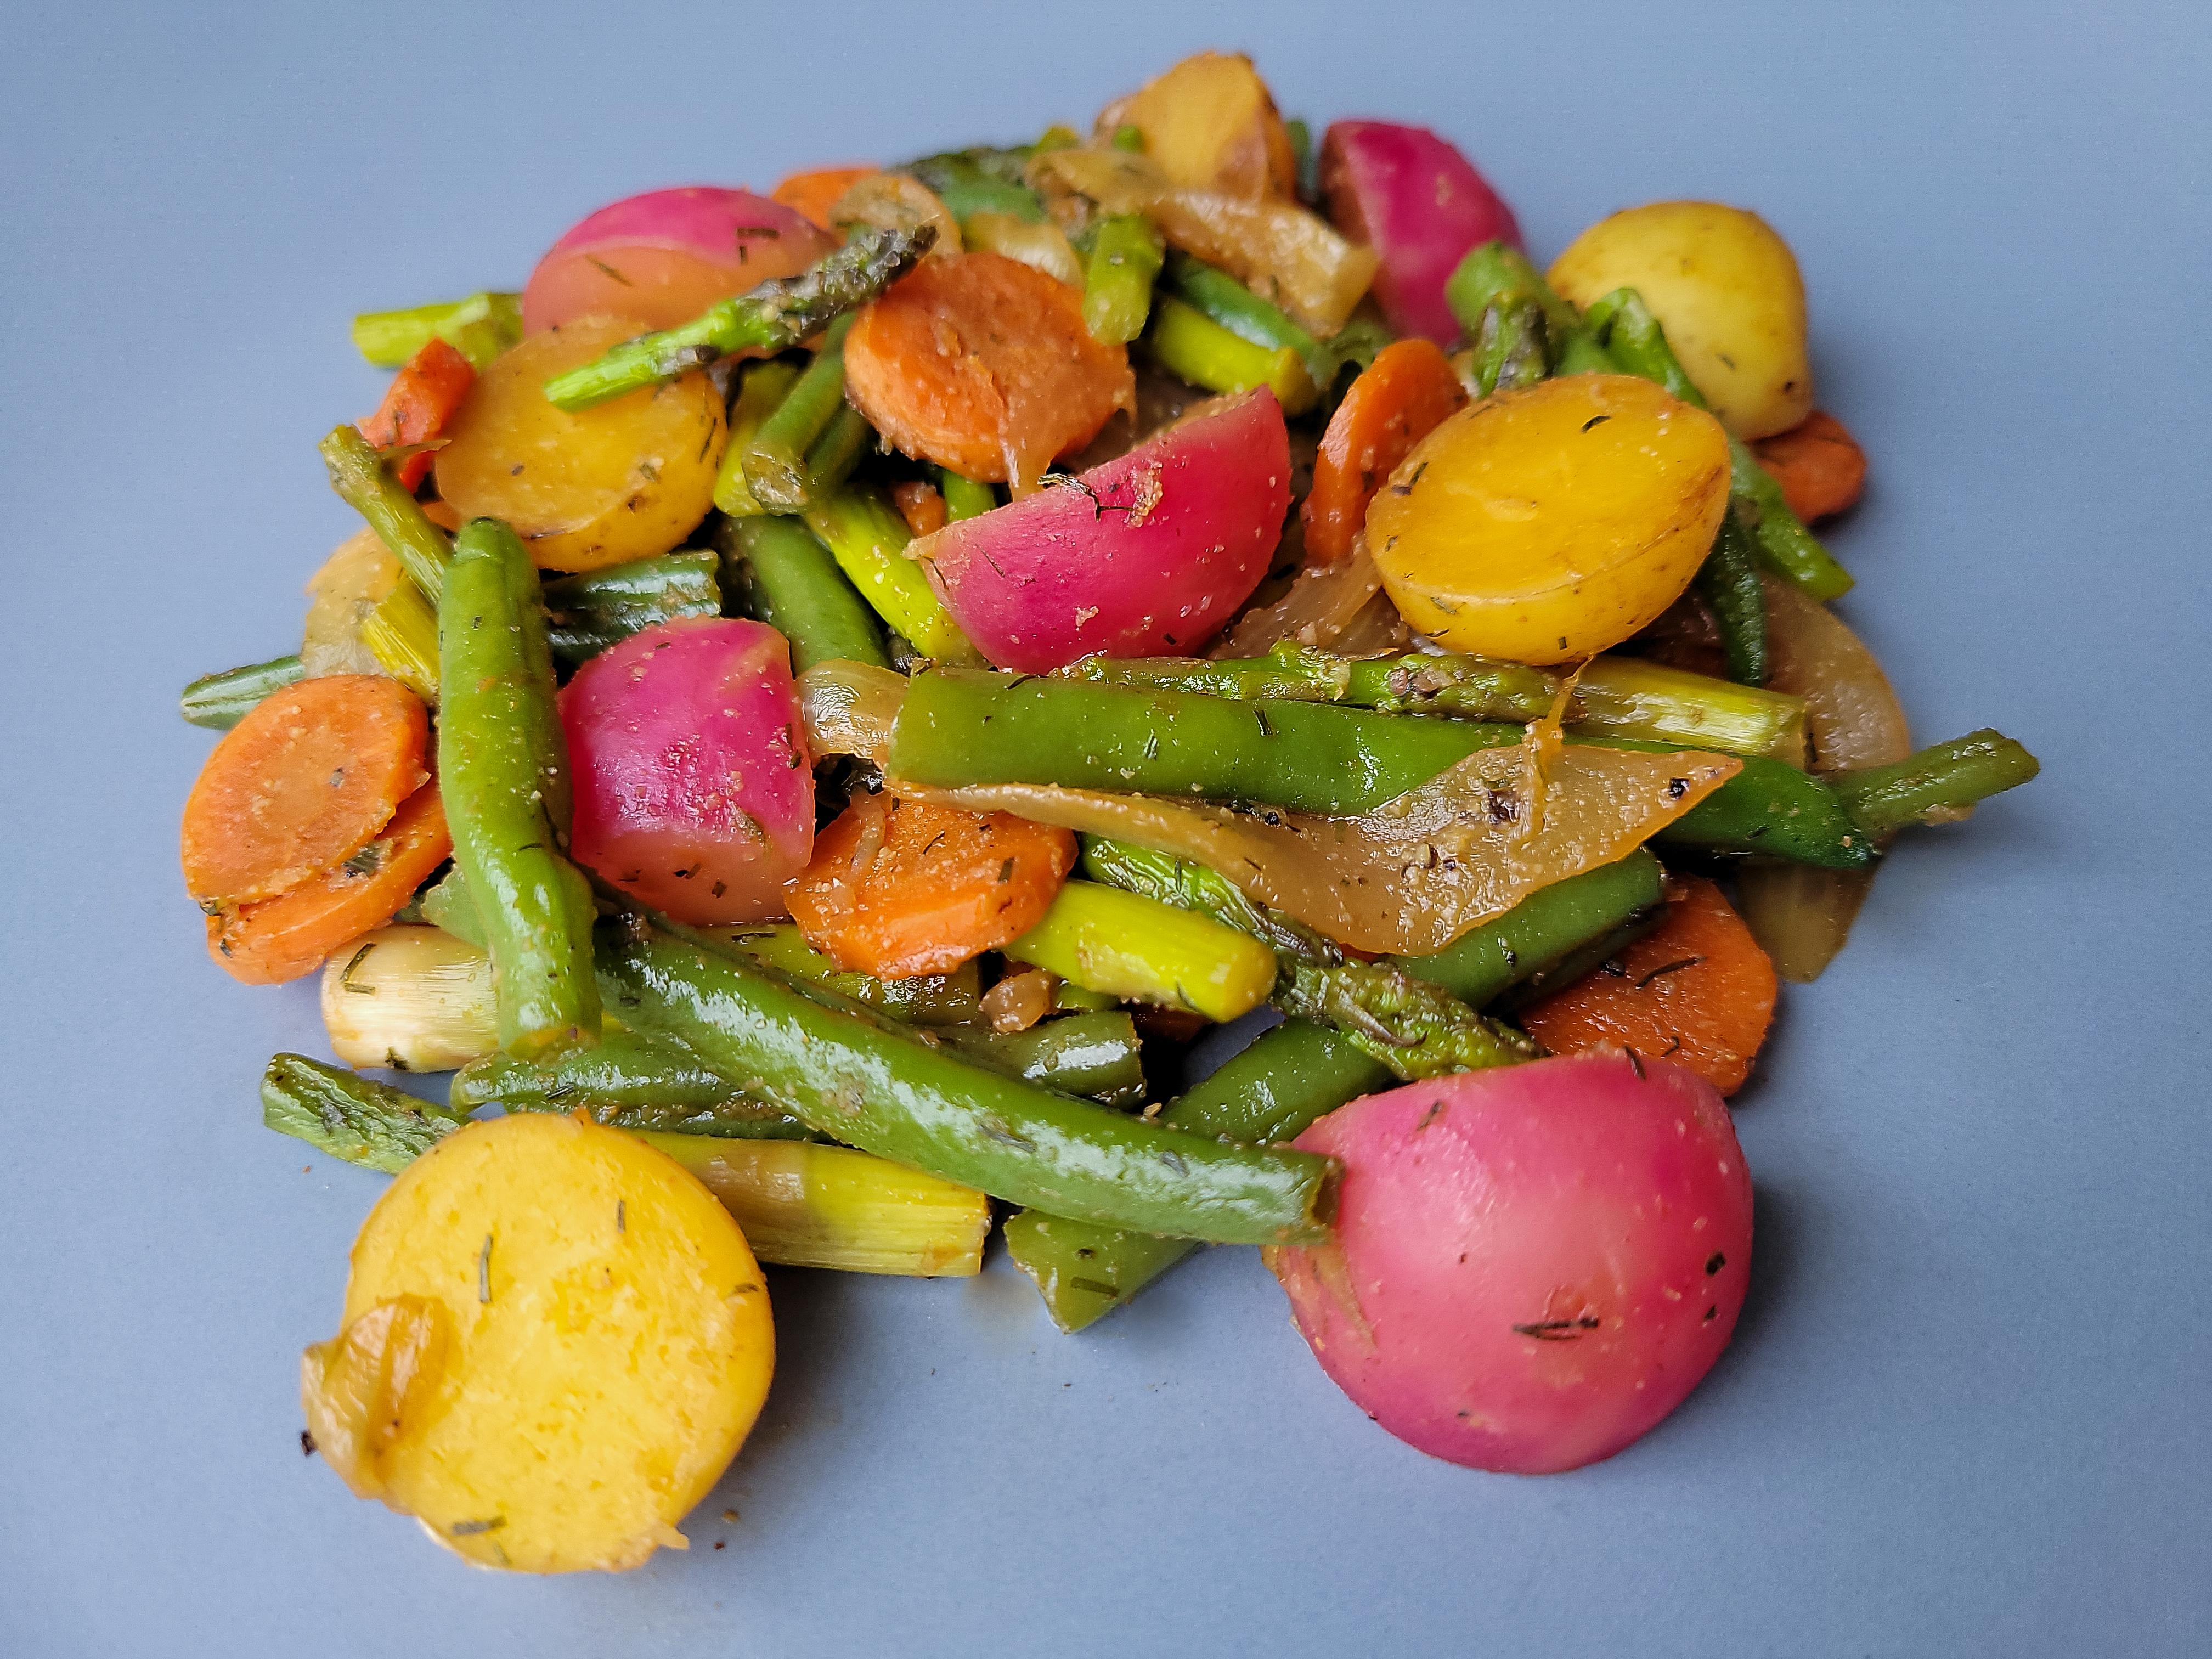 Spring vegetables including potatoes, carrots, asparagus, radishes and sugar snap peas on a blue plate.